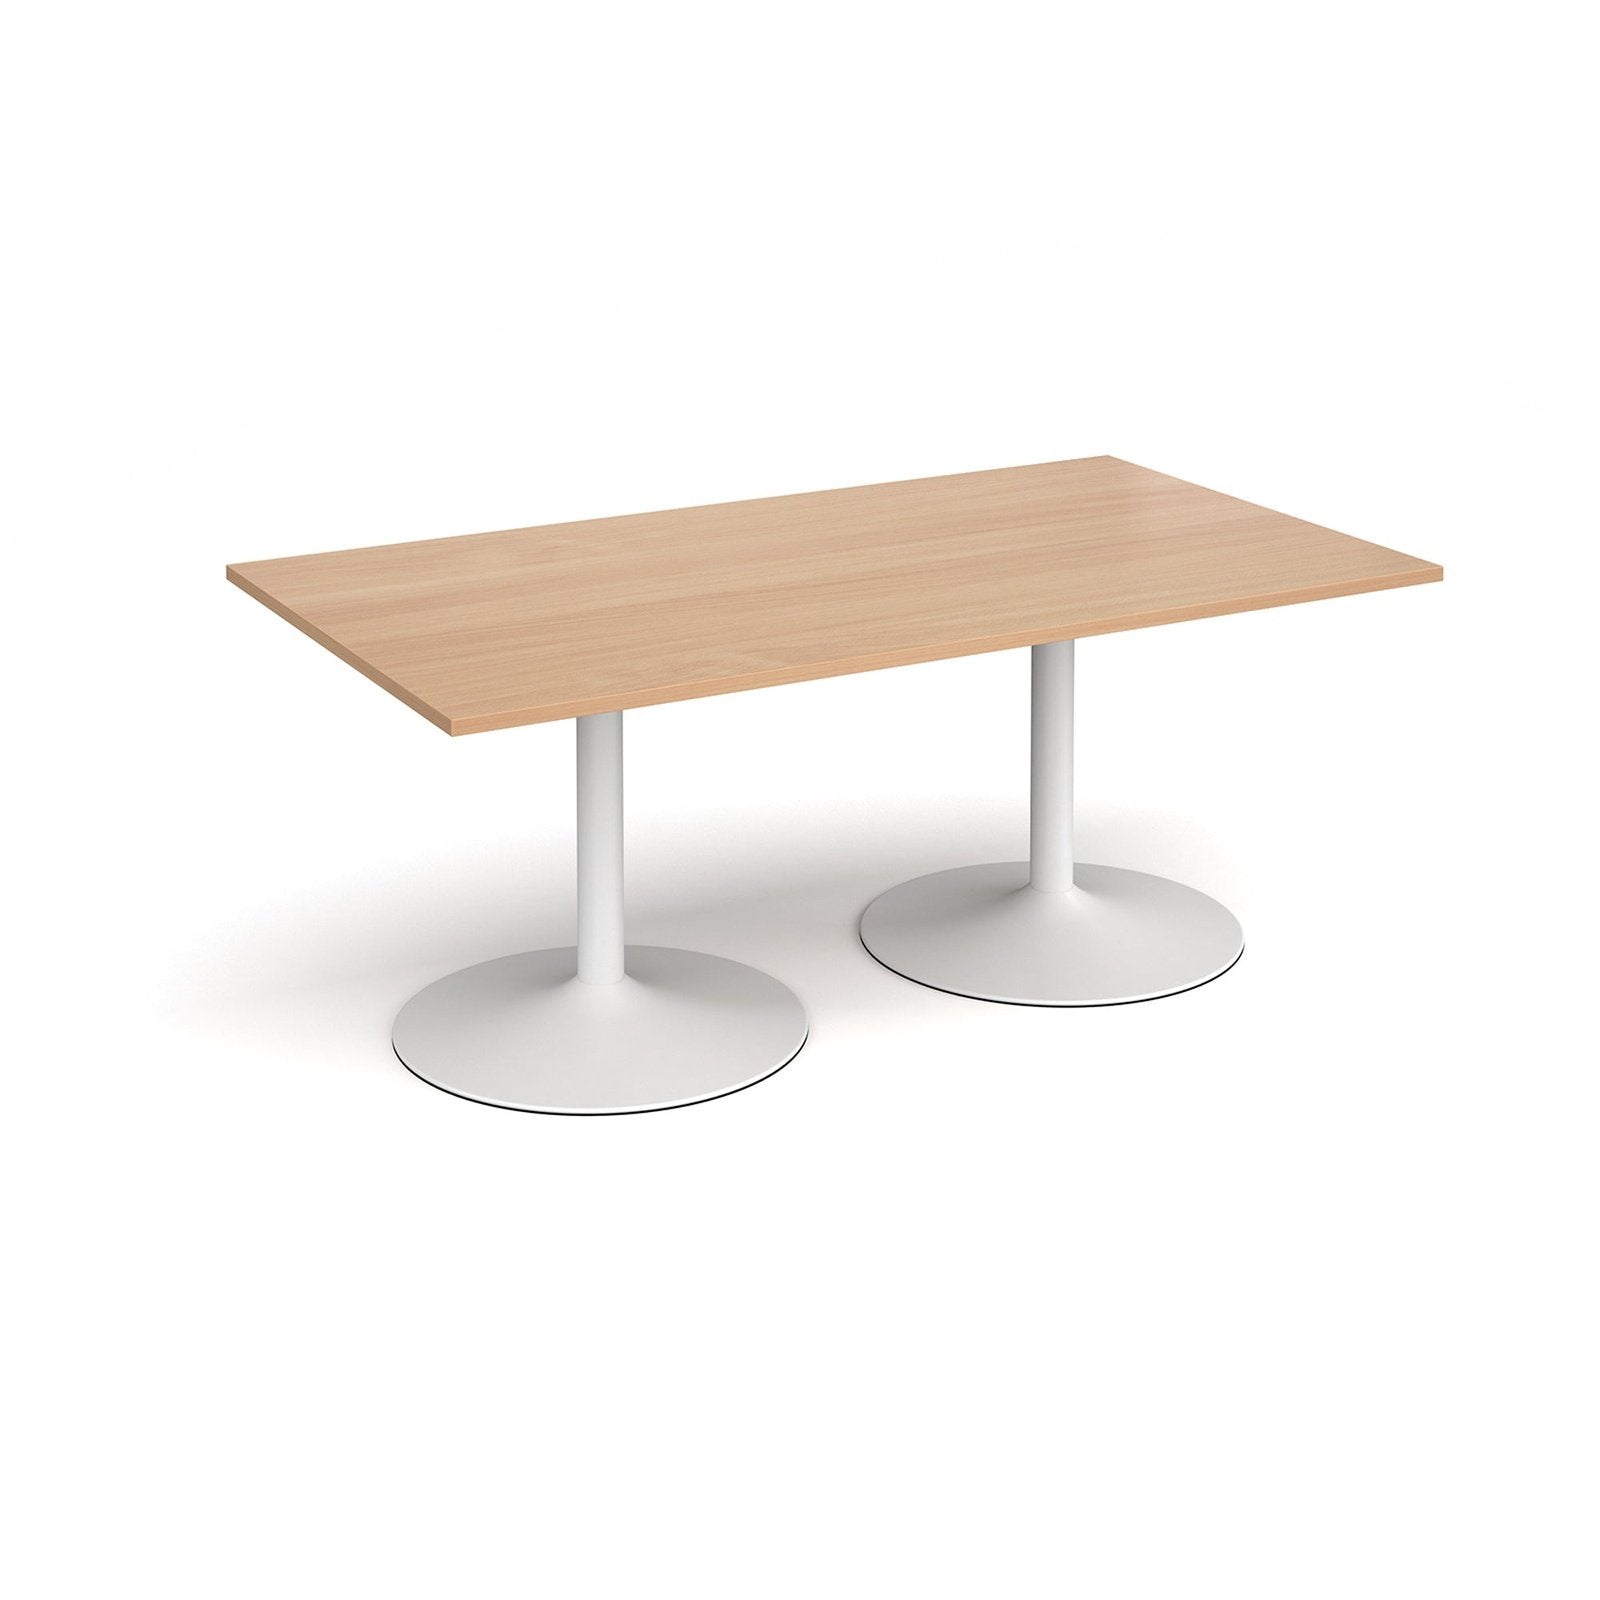 Trumpet base rectangular boardroom table - Office Products Online